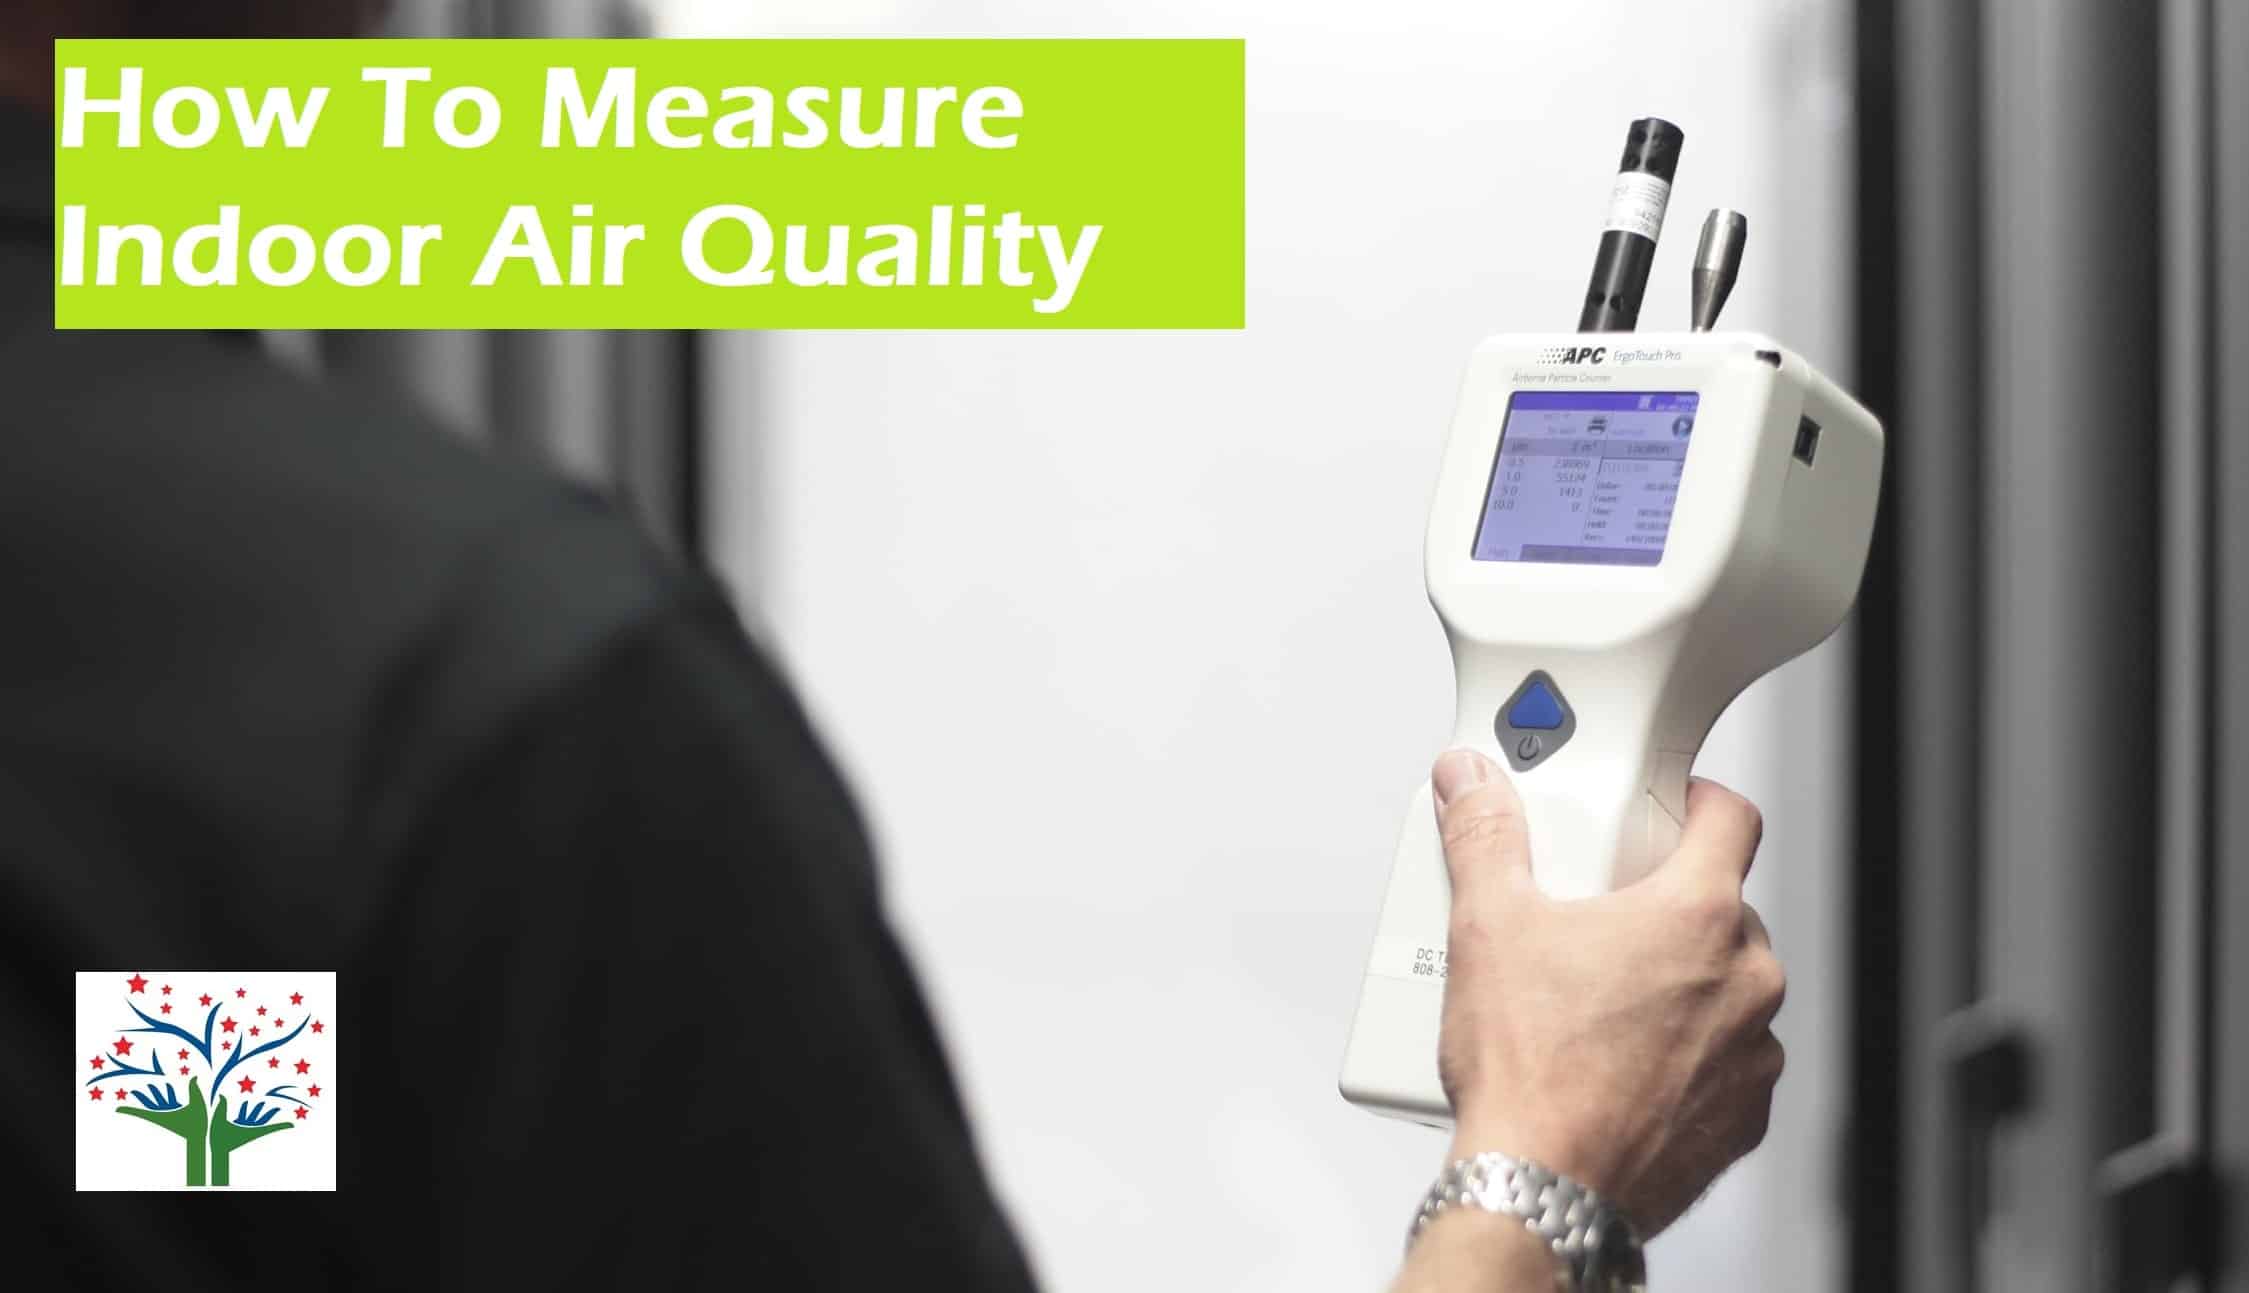 How to Measure Indoor Air Quality?